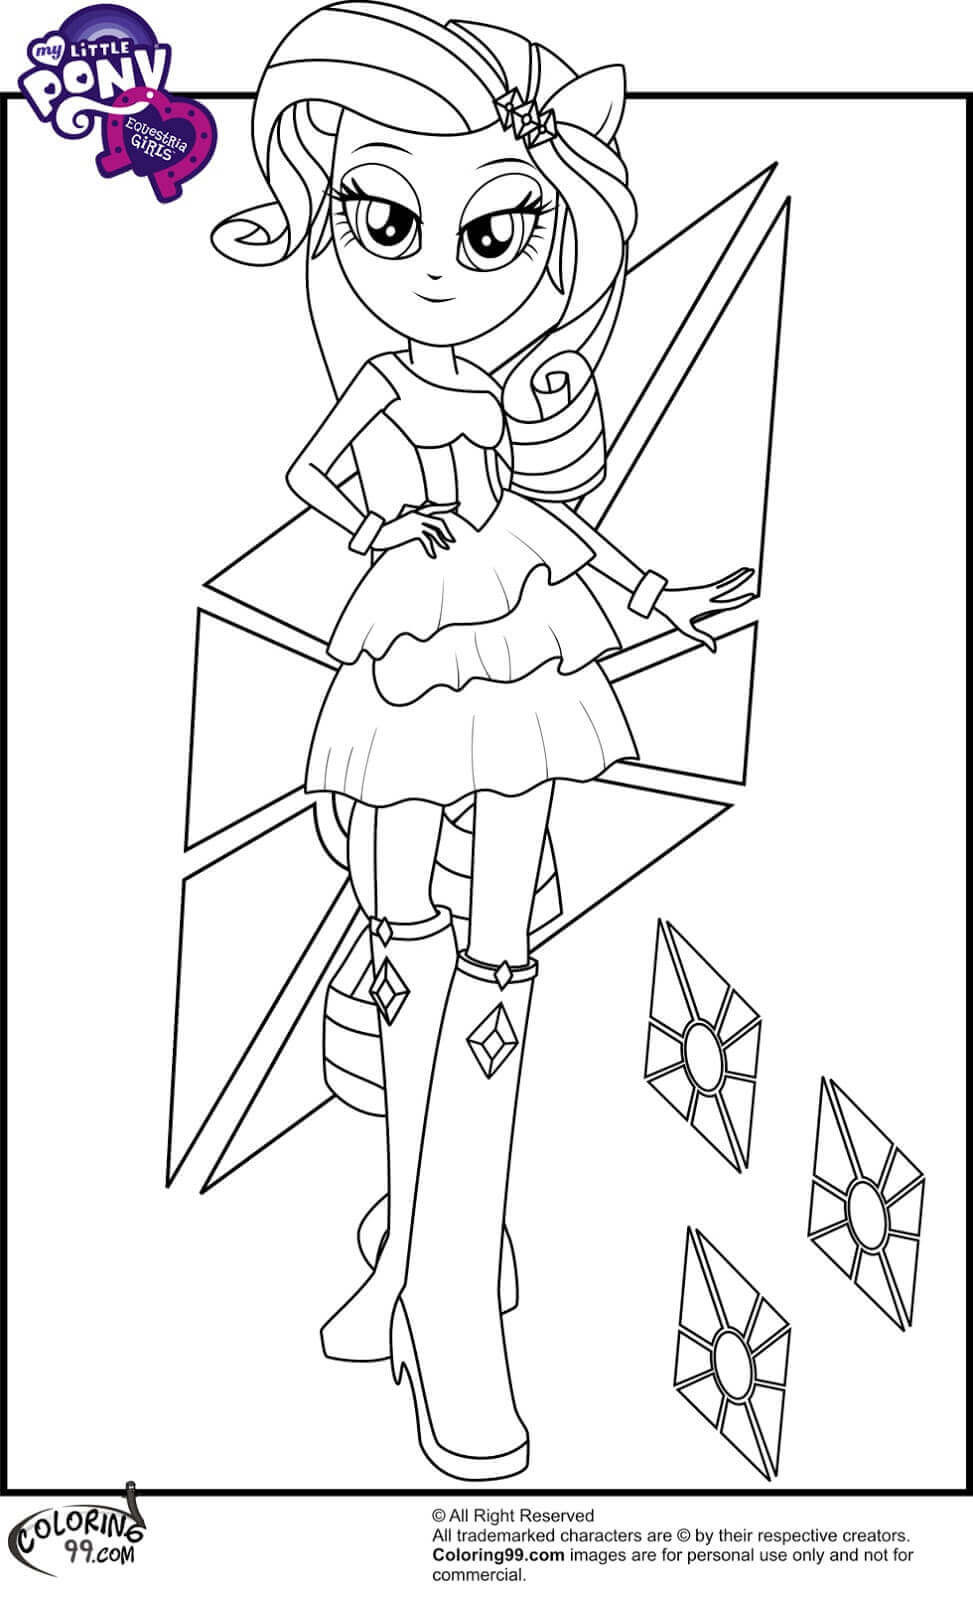 Equestria Girls Sunset Shimmer Coloring Pages
 15 Printable My Little Pony Equestria Girls Coloring Pages